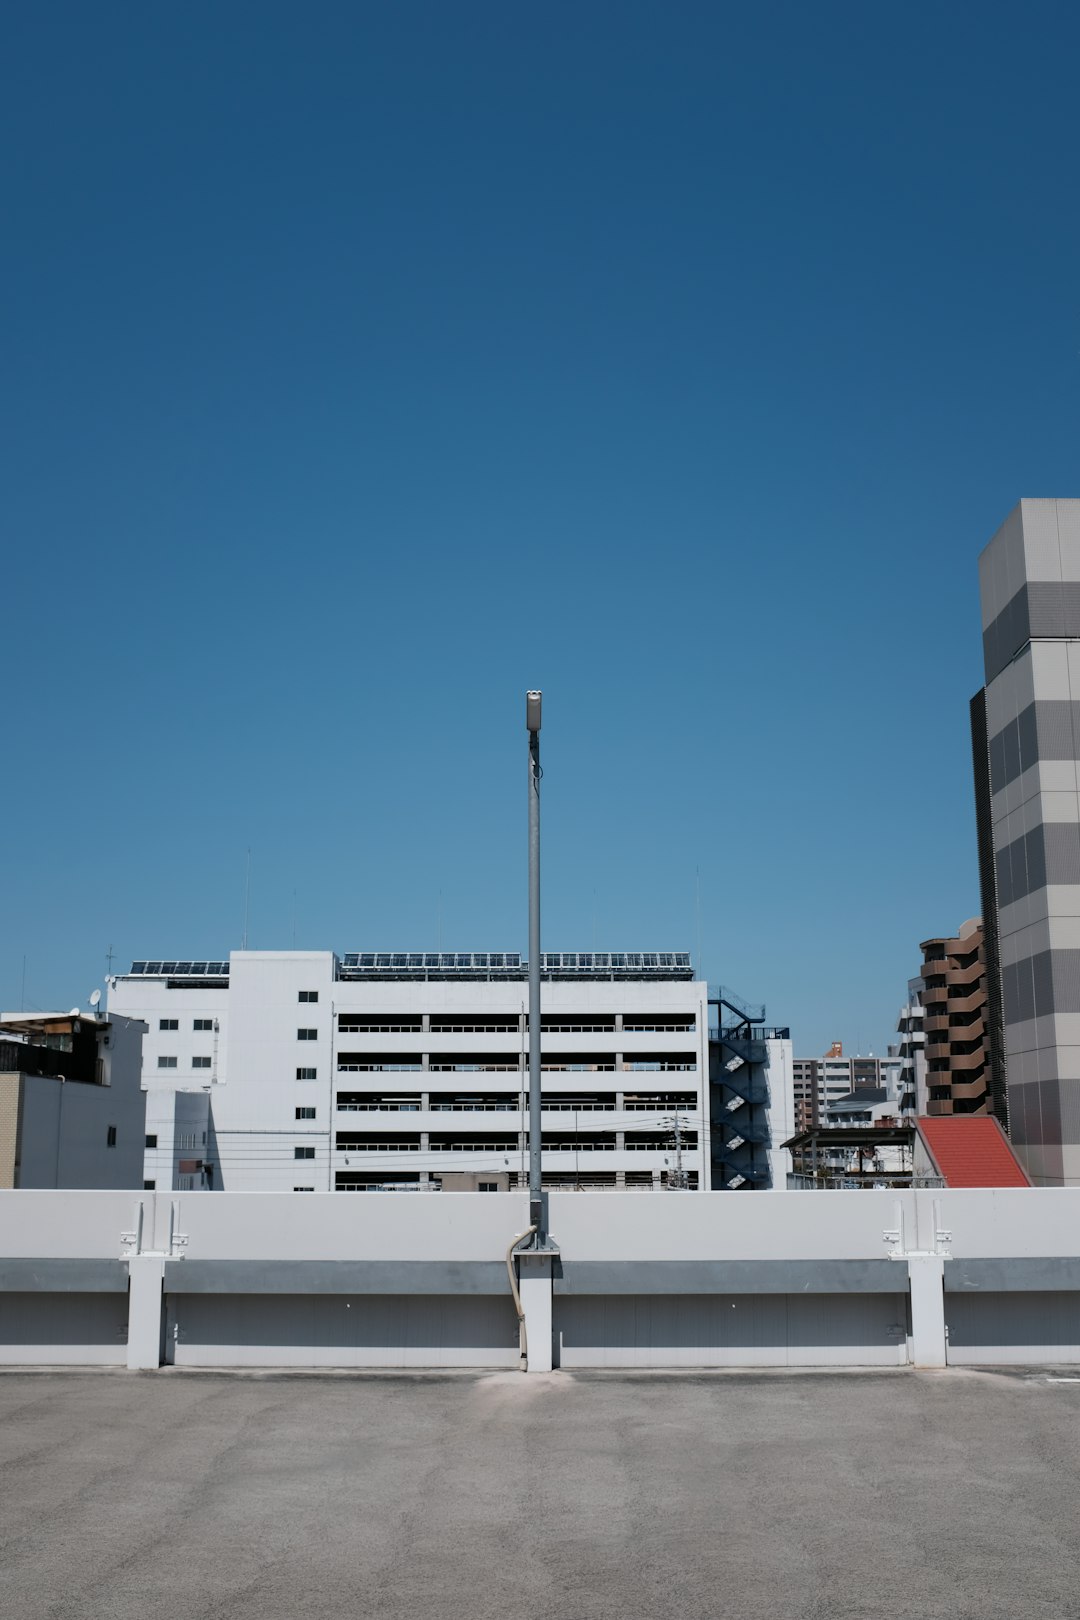 white and brown concrete building under blue sky during daytime